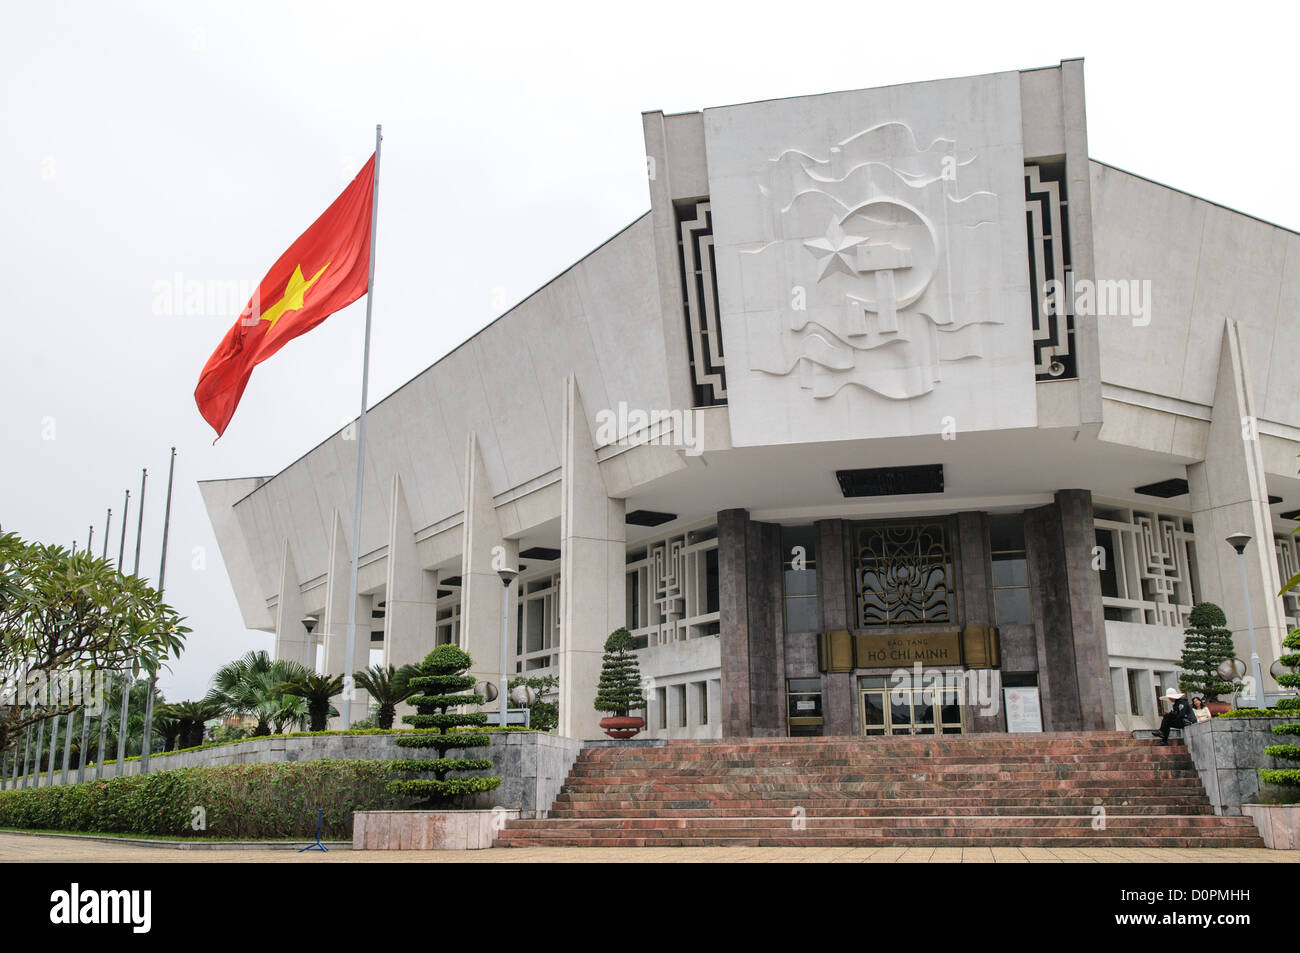 HANOI, Vietnam - The main entrance of the Ho Chi Minh, or Uncle Ho, the former leader of North Vietnam and founder of modern unified Vietnam. Stock Photo